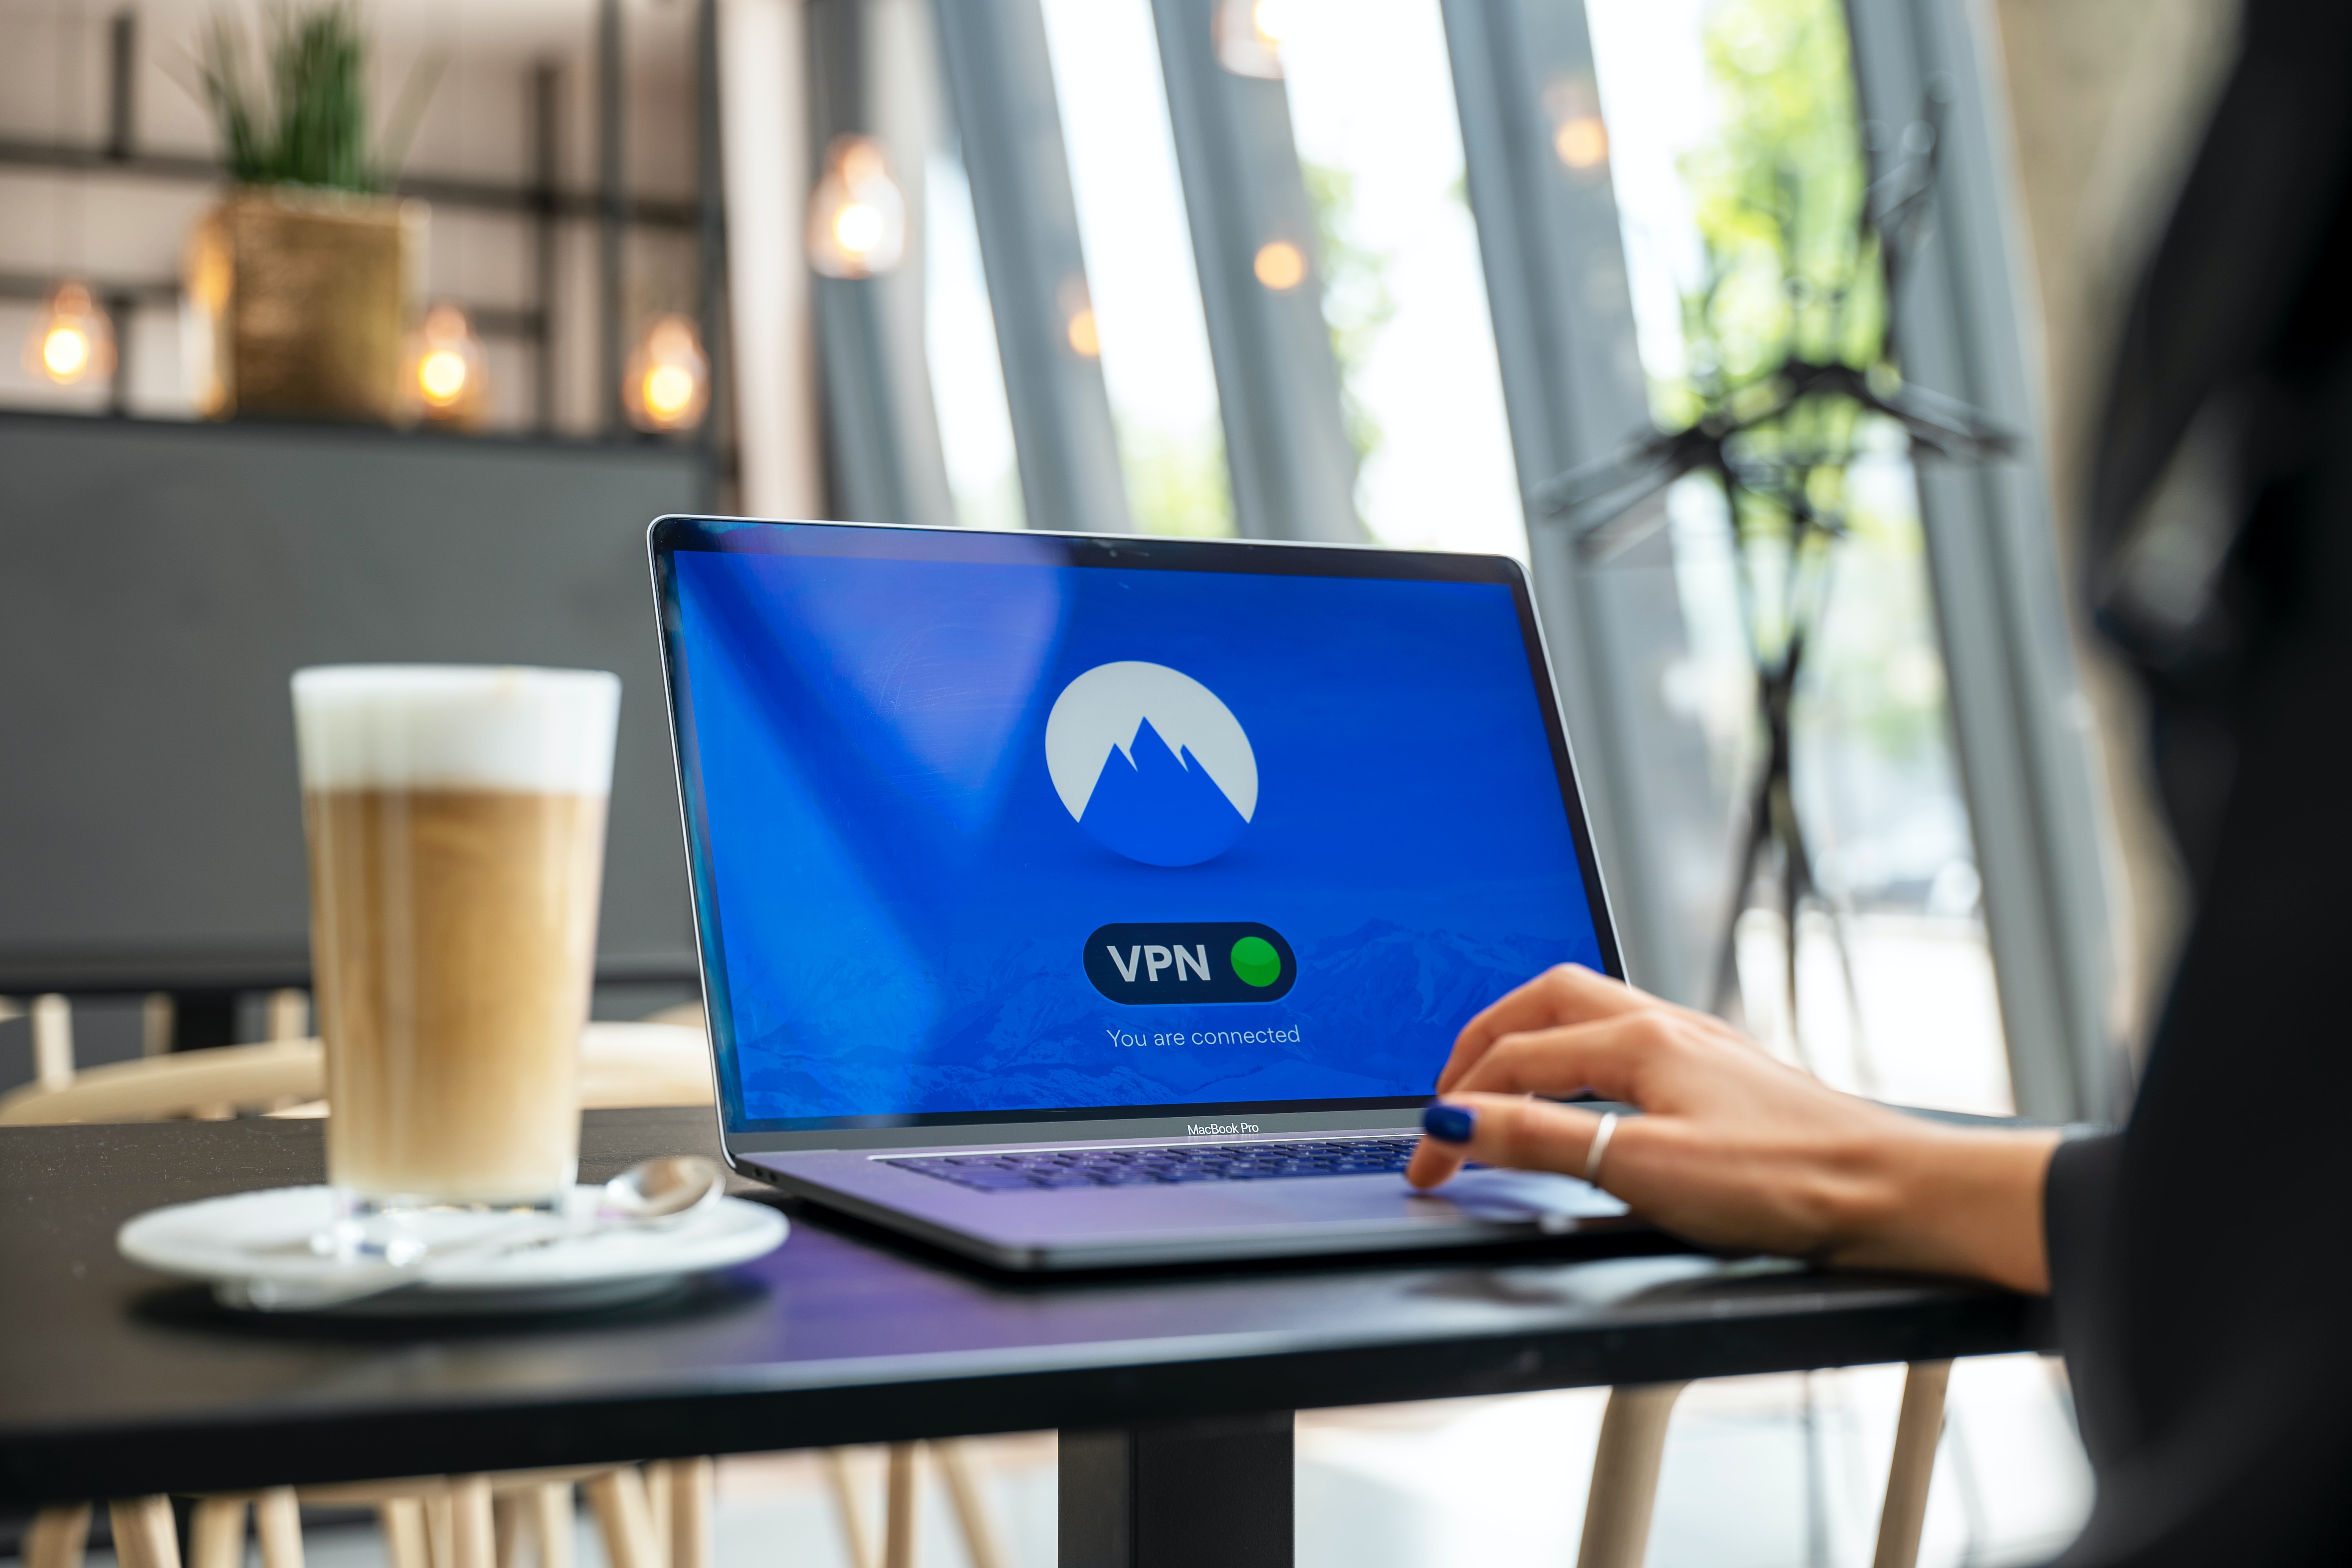 A woman sitting at a cafe counter with a latte and a laptop prominently showing a connected VPN on it.